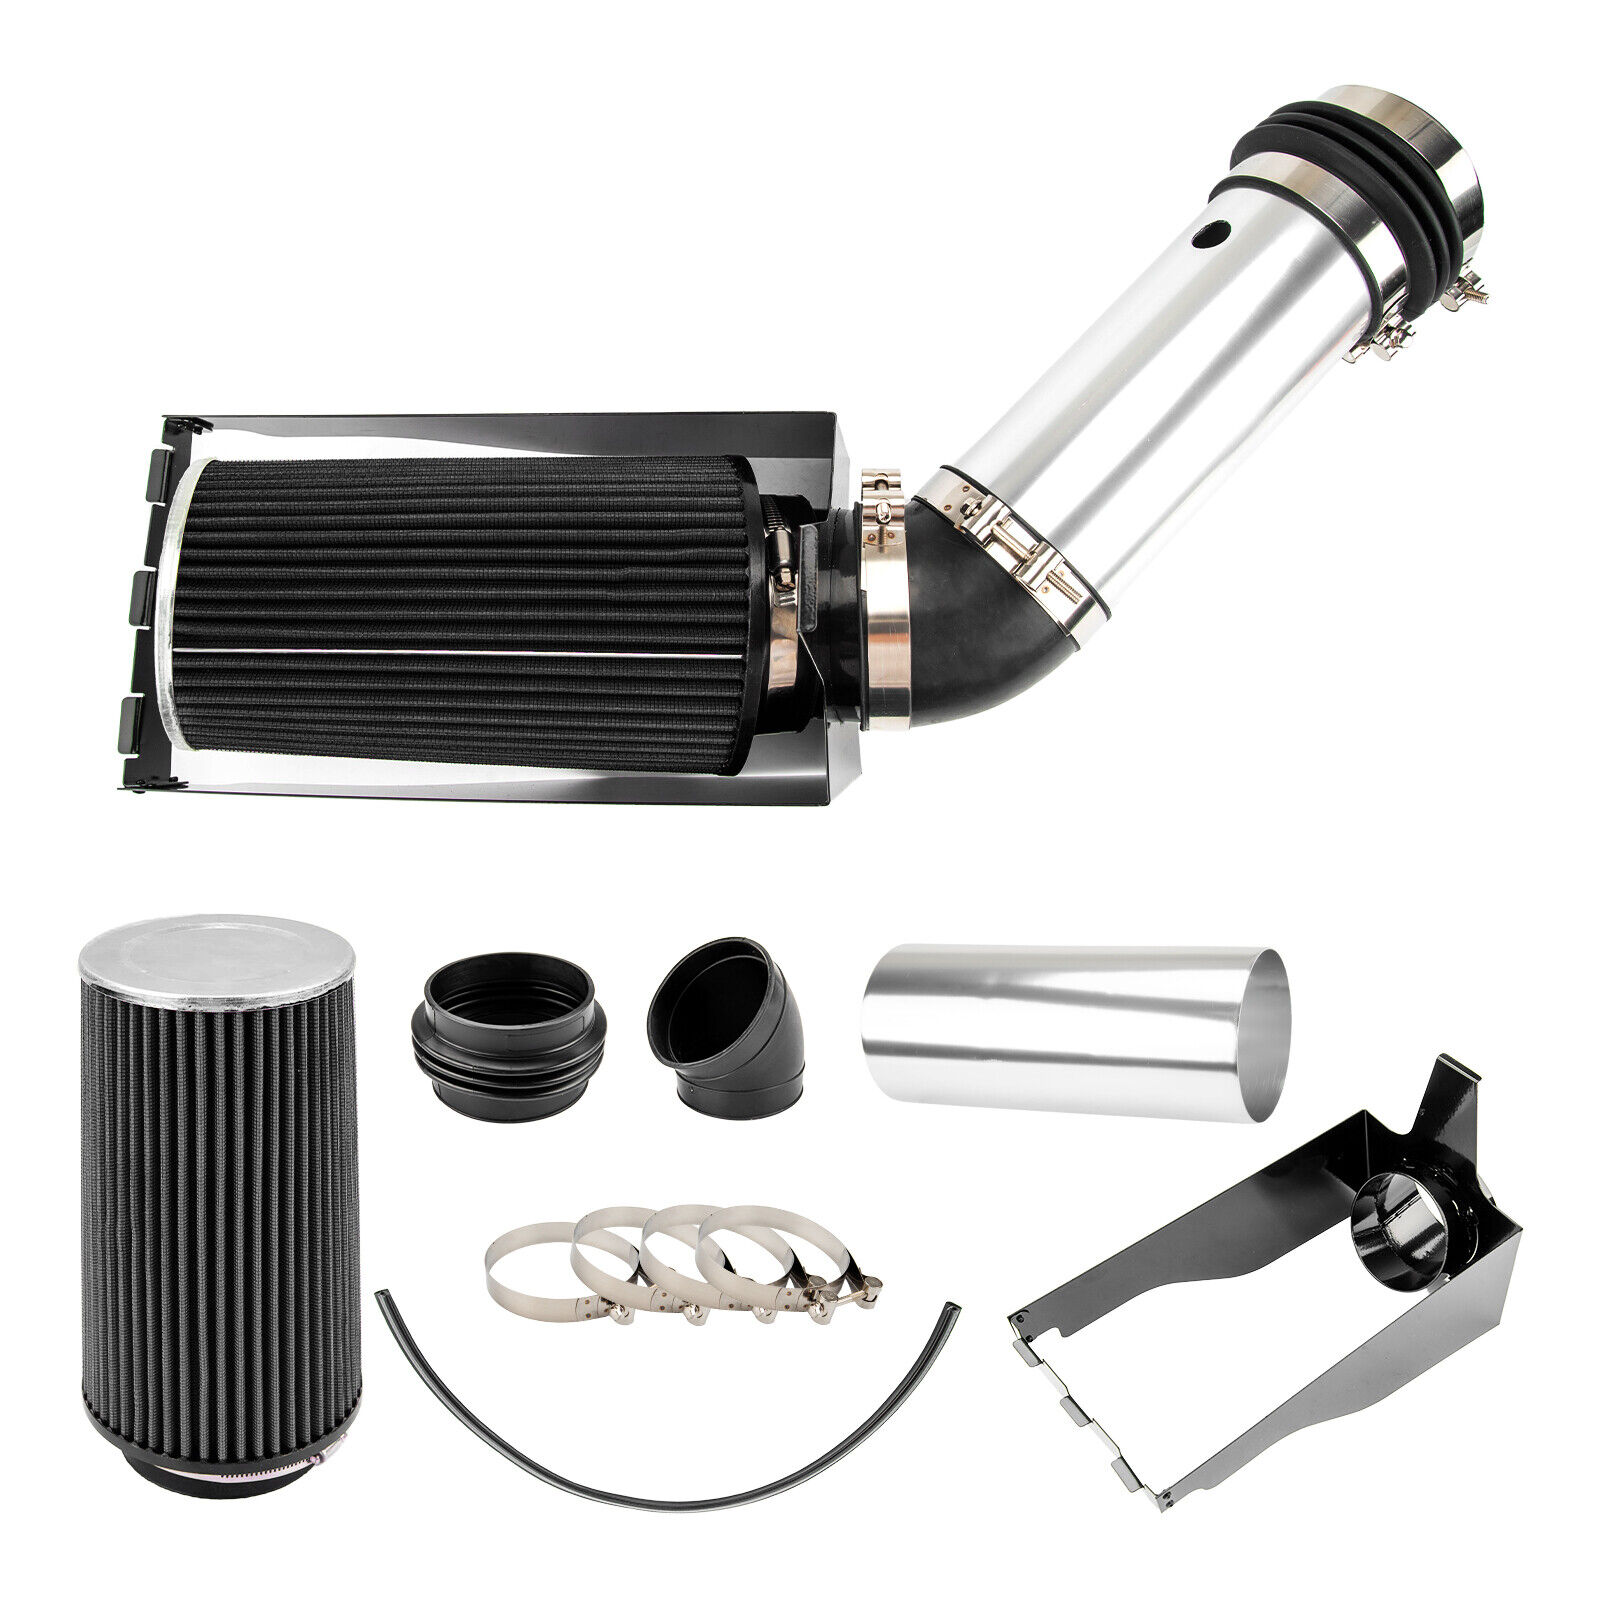 Cold Air Intake System Kit for 1999-2003 Ford F250 F350 Excursion Super Duty